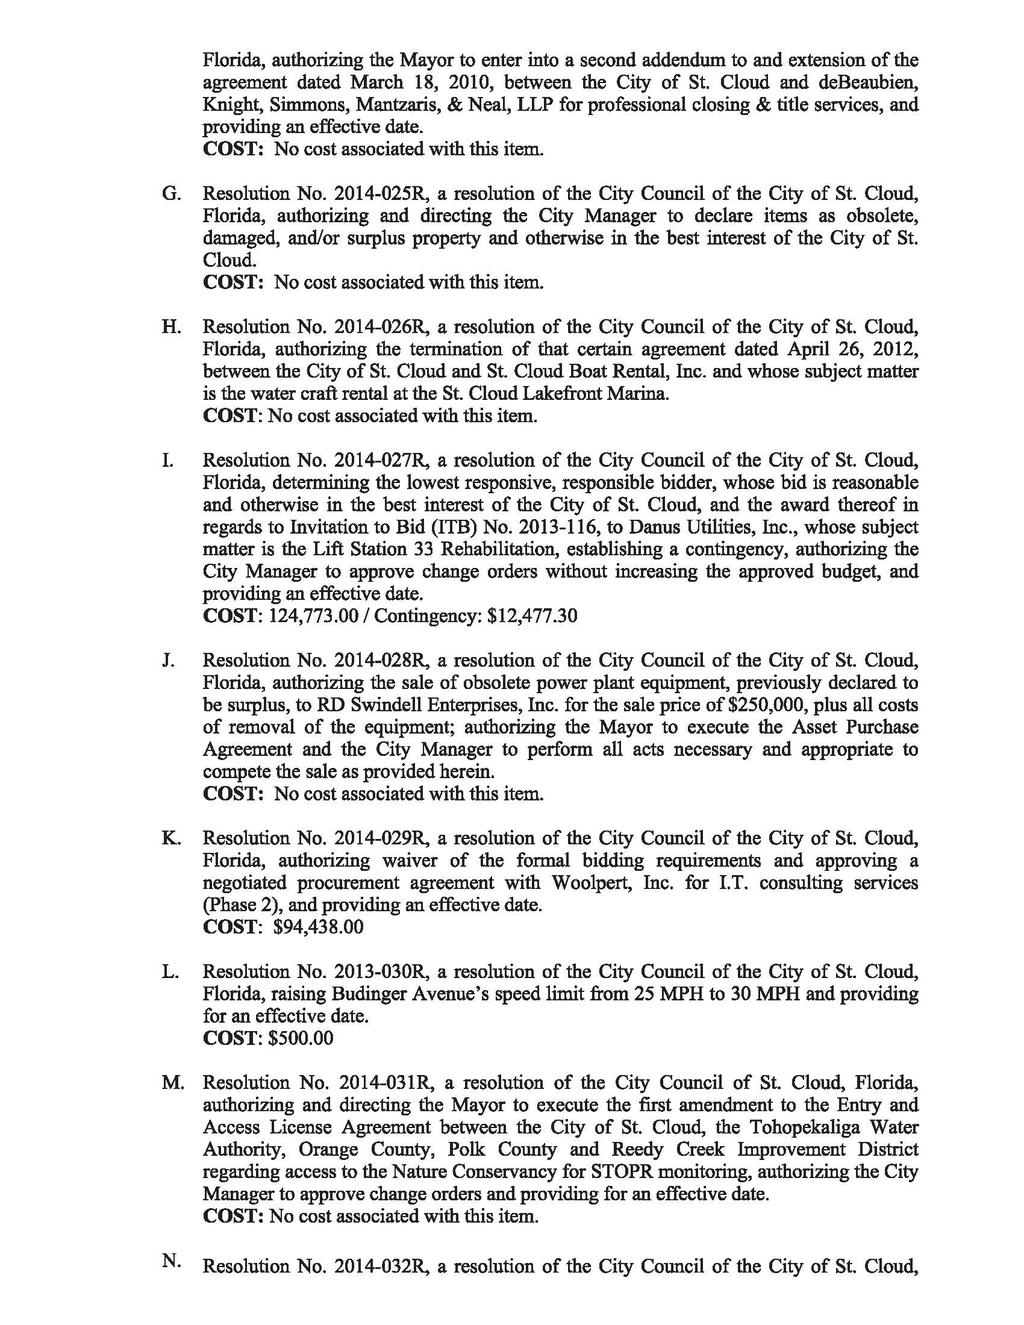 Florida, authorizing the Mayor to enter into a second addendum to and extension of the agreement dated March 18, 2010, between the City of St.